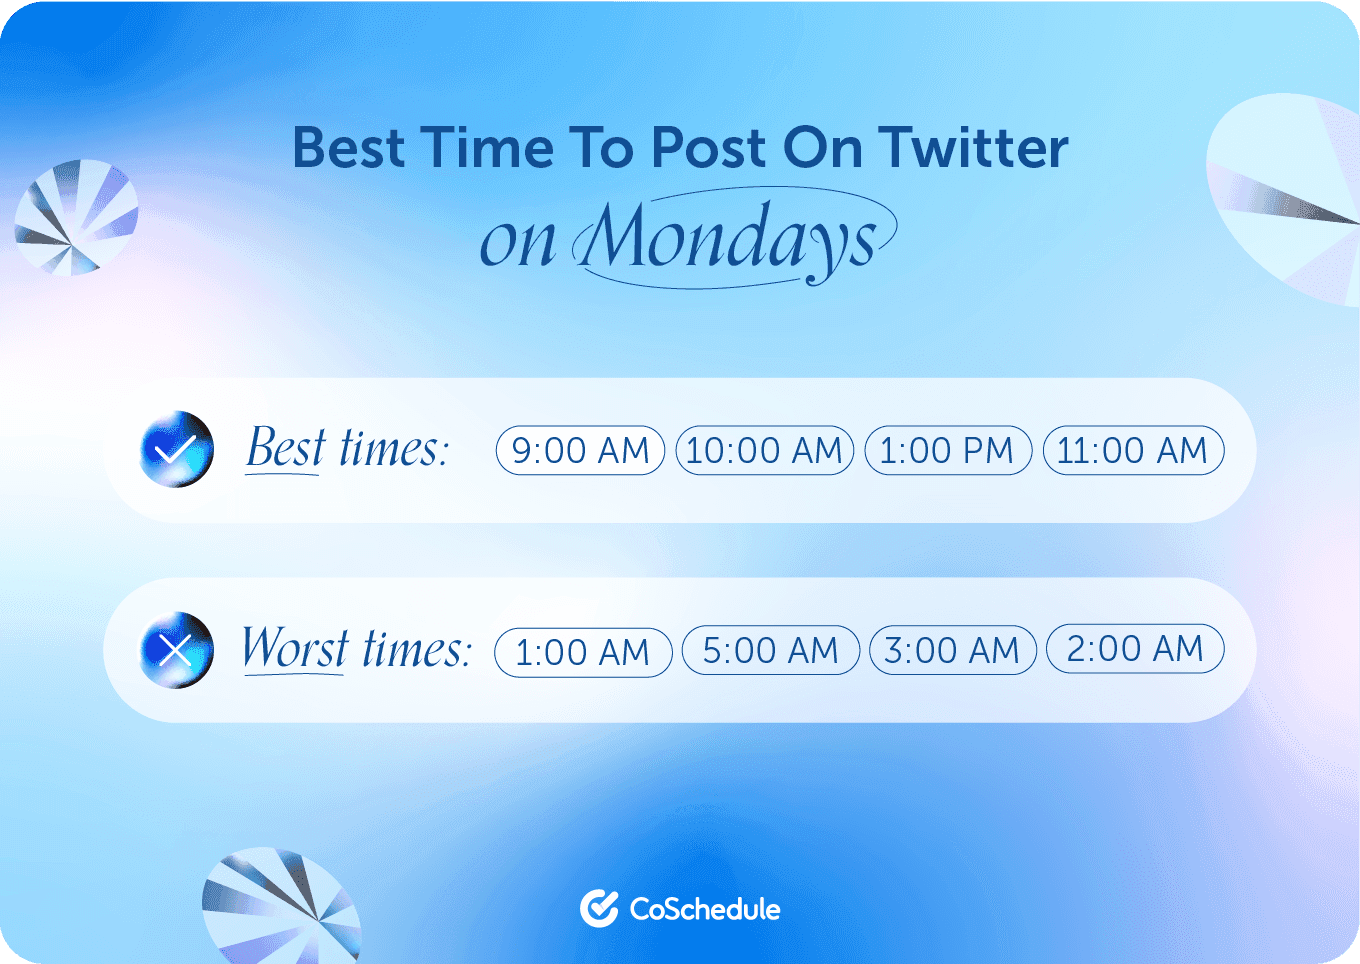 Coschedule graphic on the best times to post to Twitter on Mondays